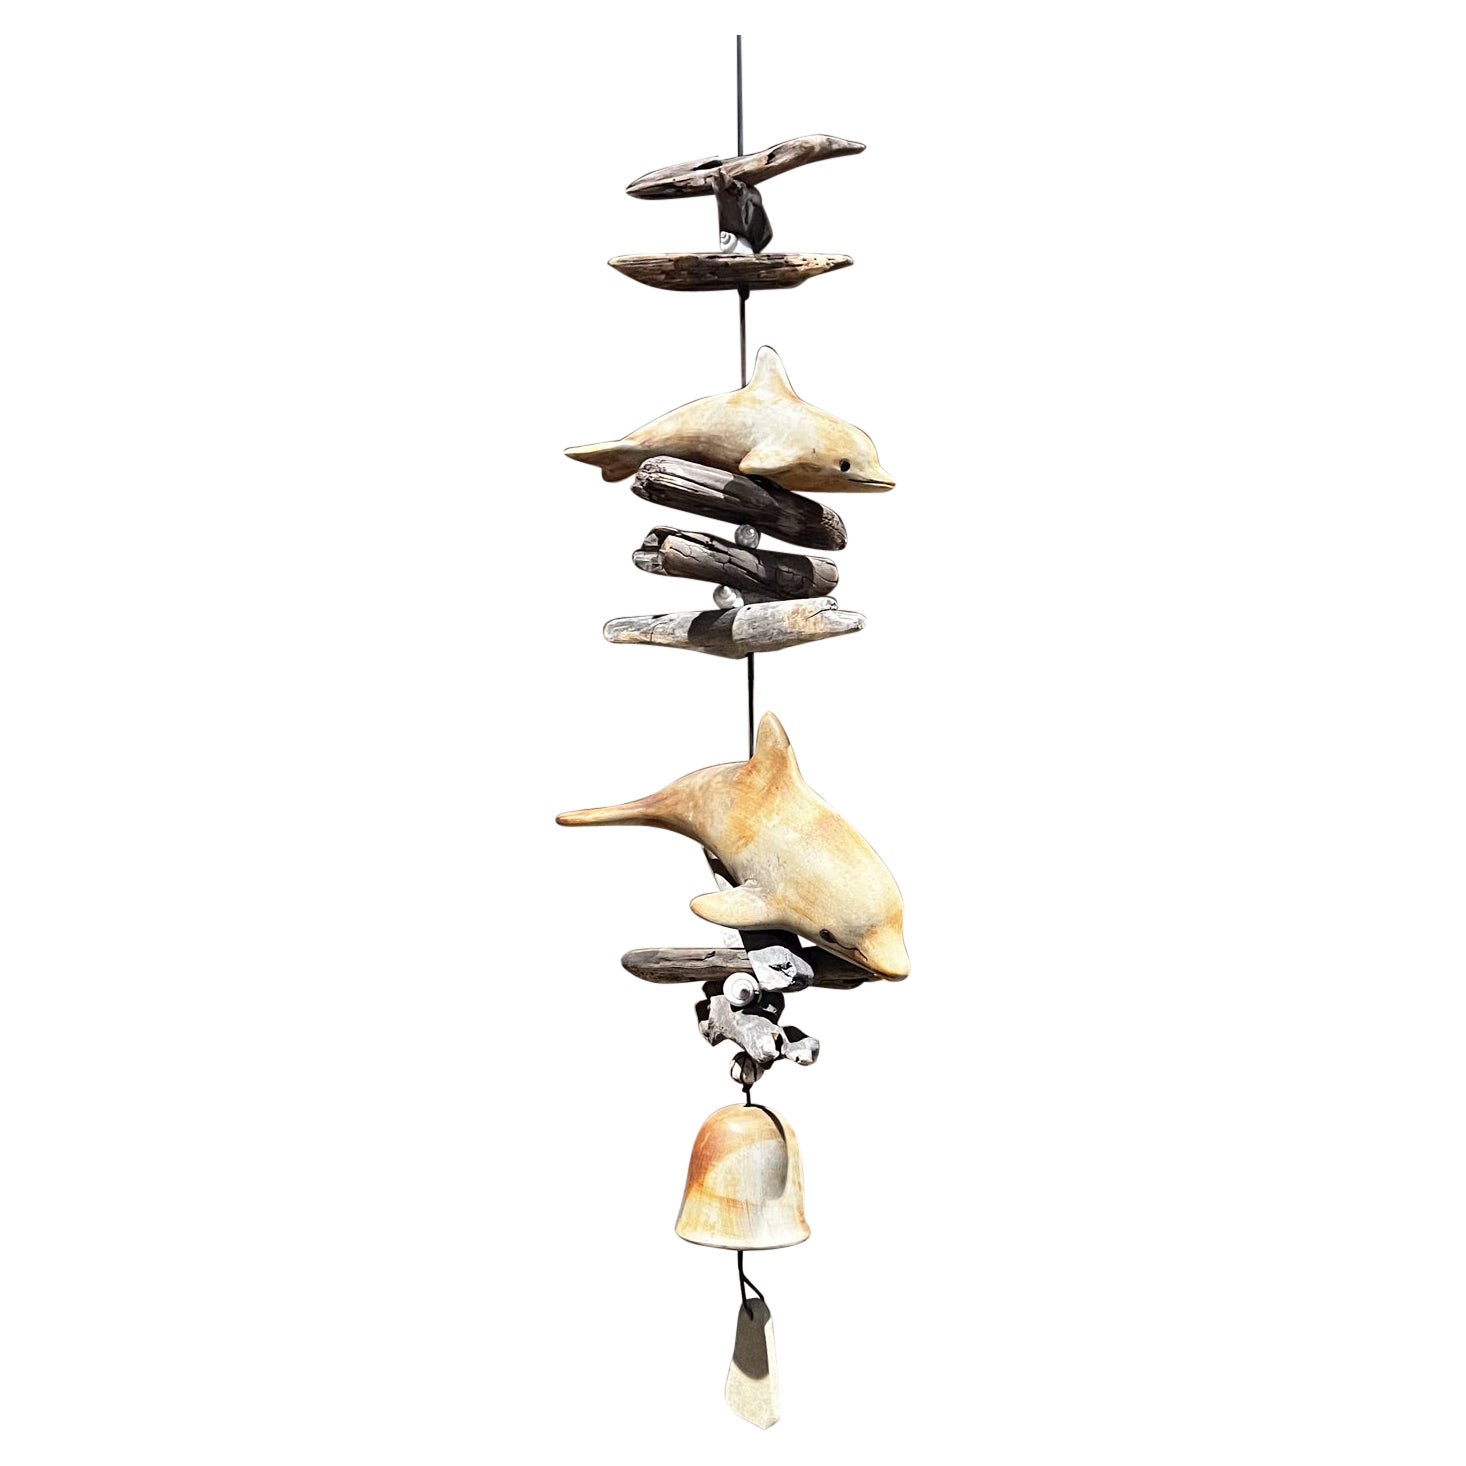 1989 Handcrafted Dolphin Art Pottery Wood Wind Chime Bell